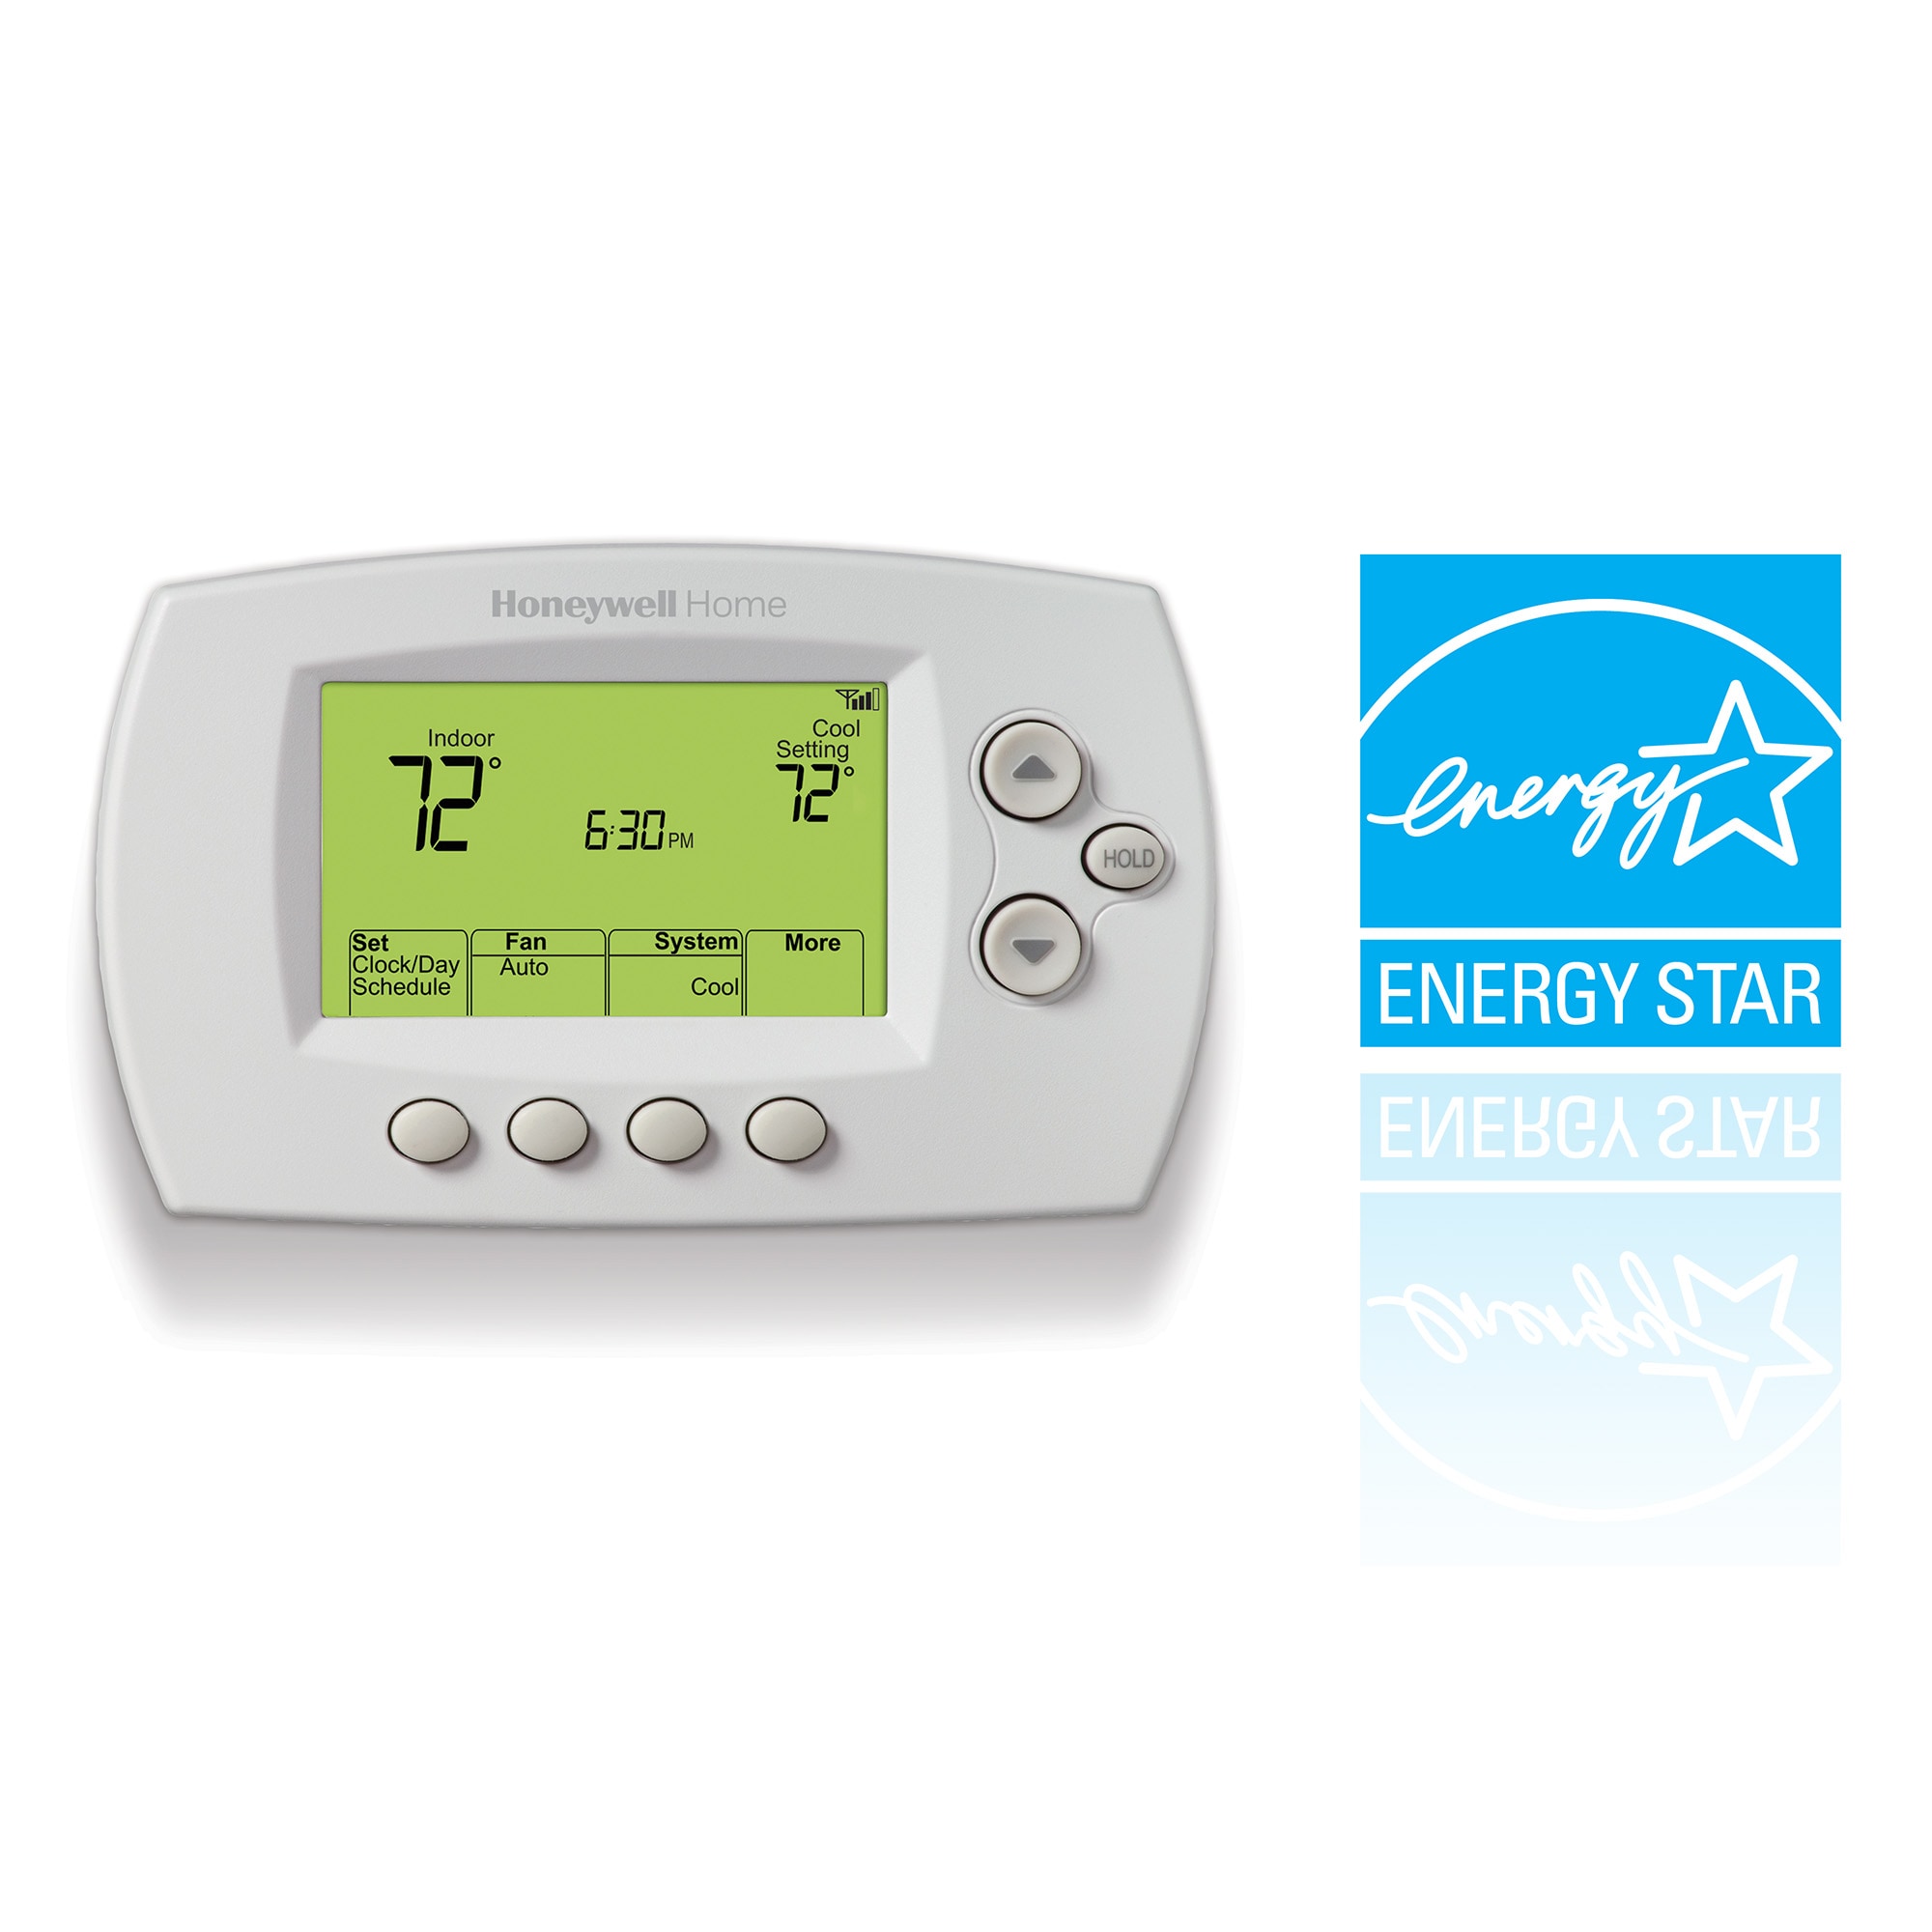 Honeywell Home Basic Programmable Wi-Fi Thermostat